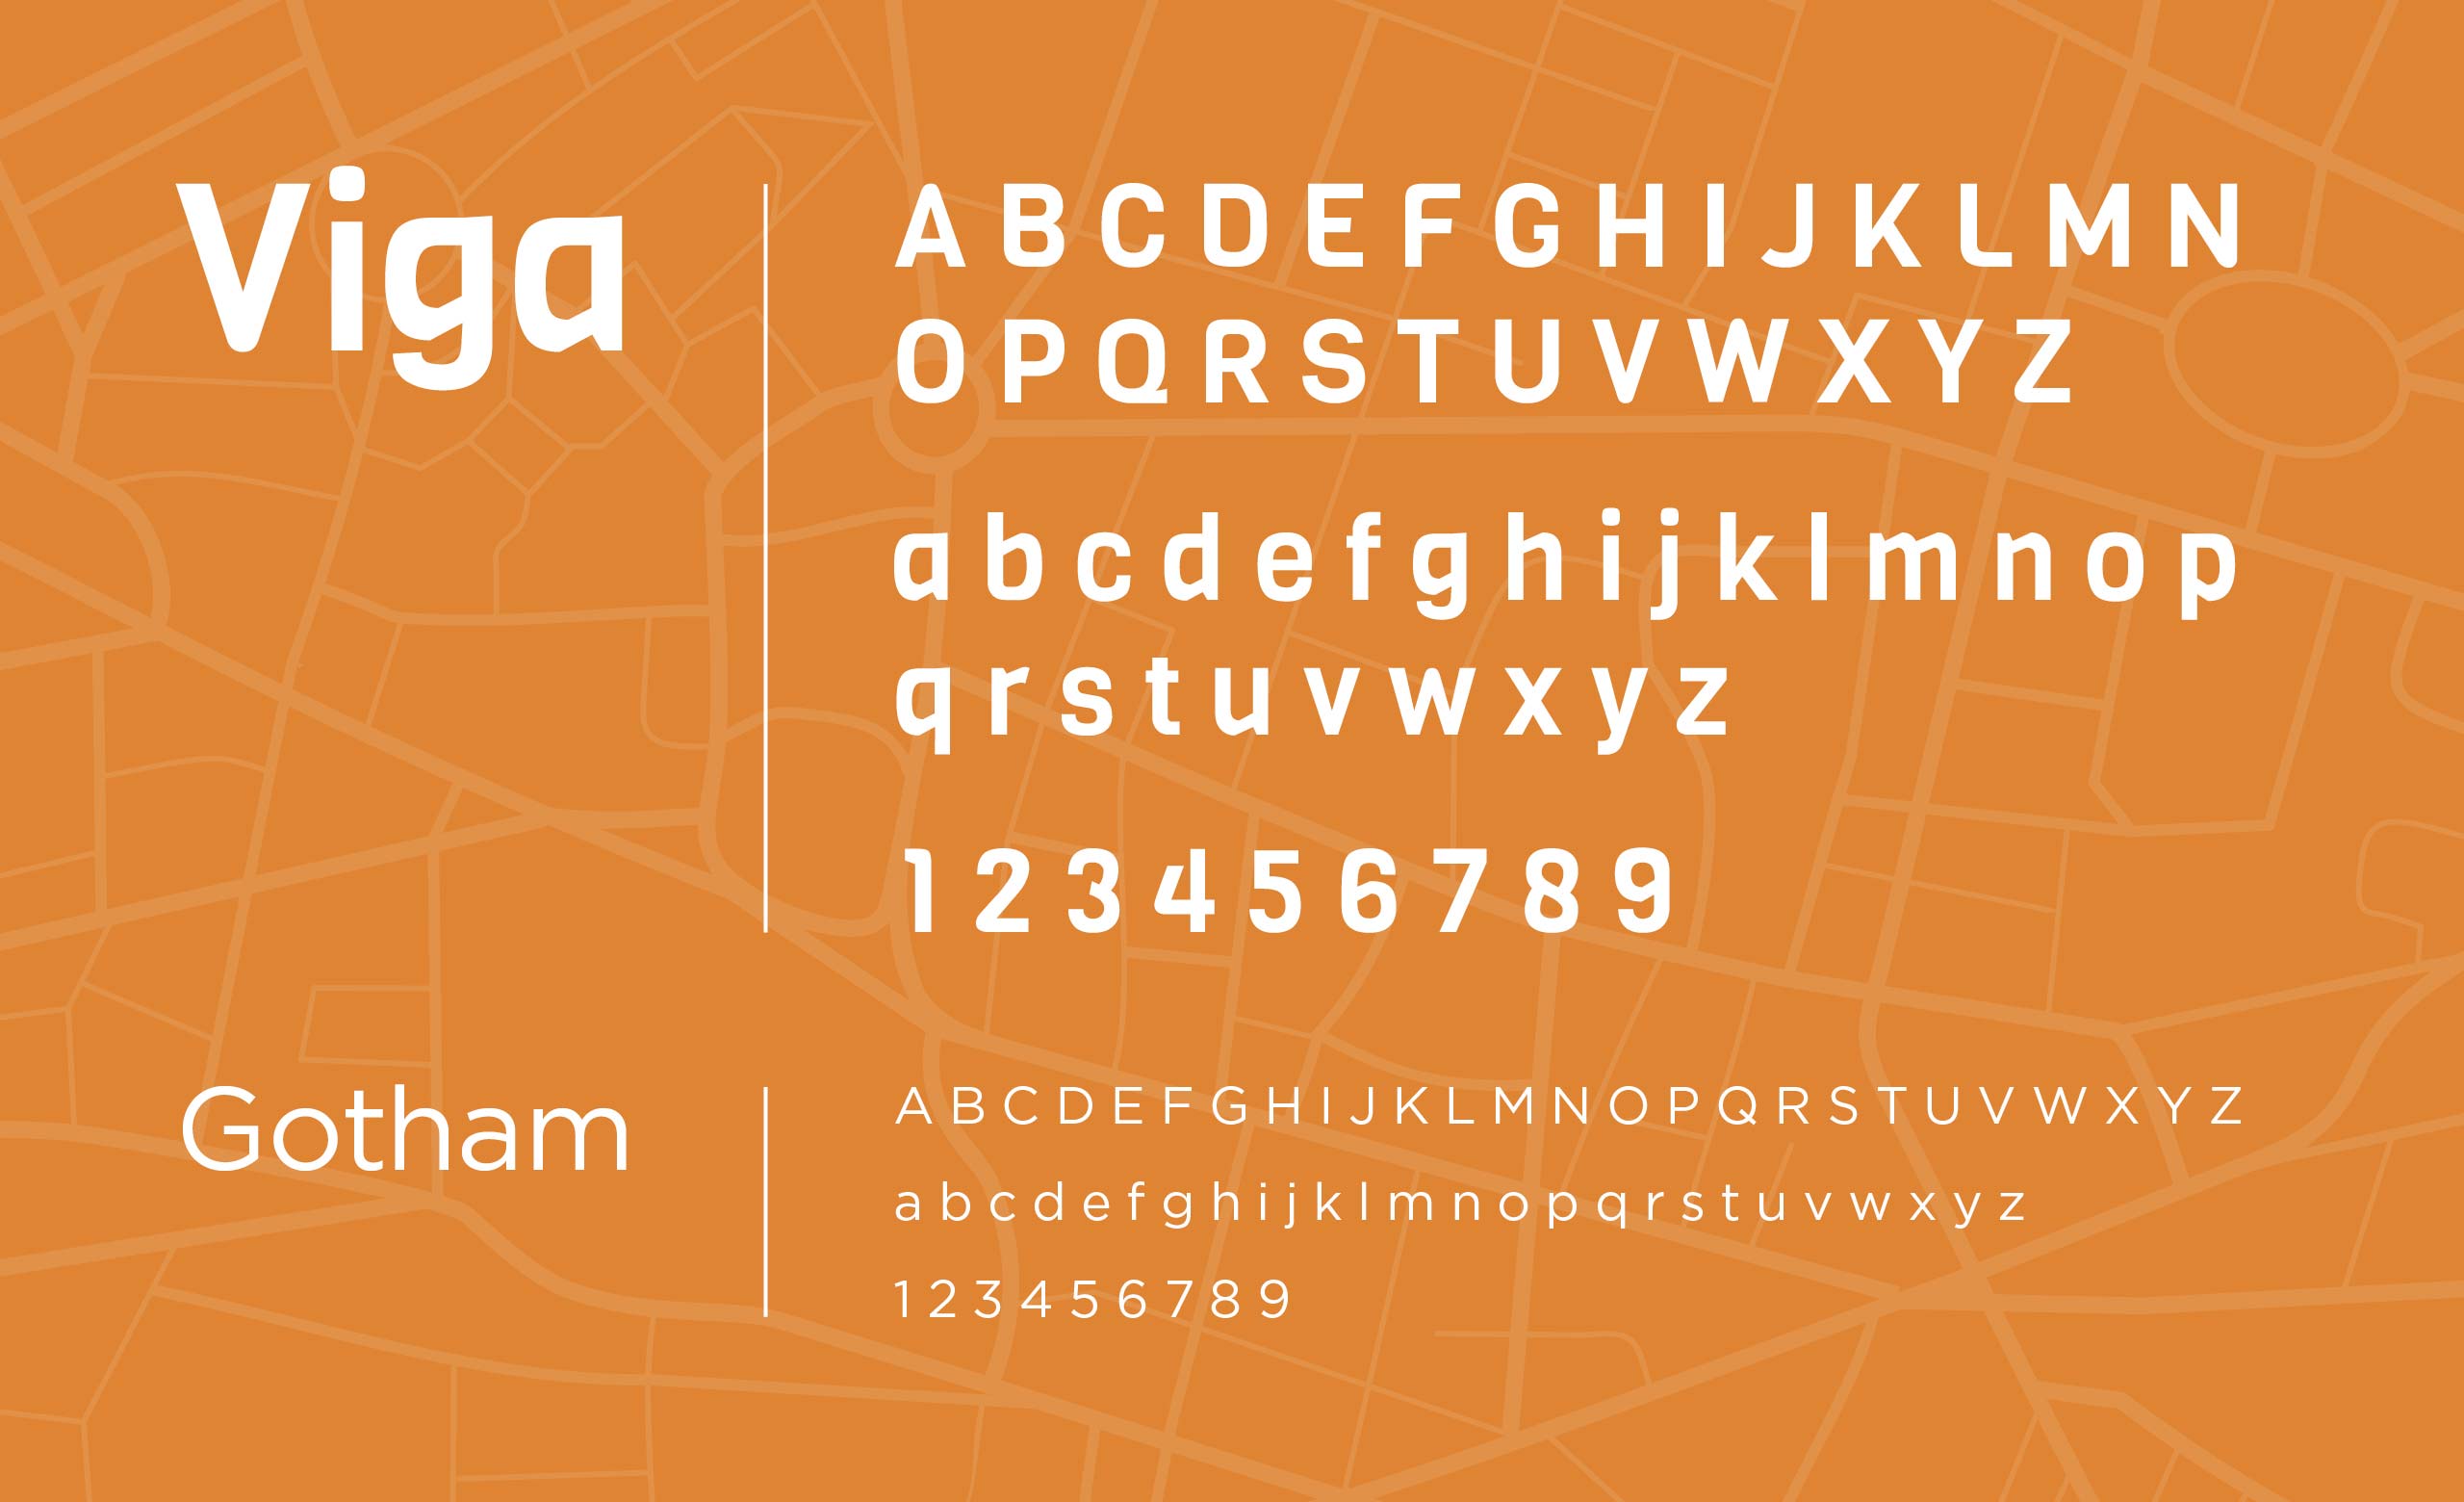 The A-Plus brand uses 2 primary typefaces: Viga and Gotham.